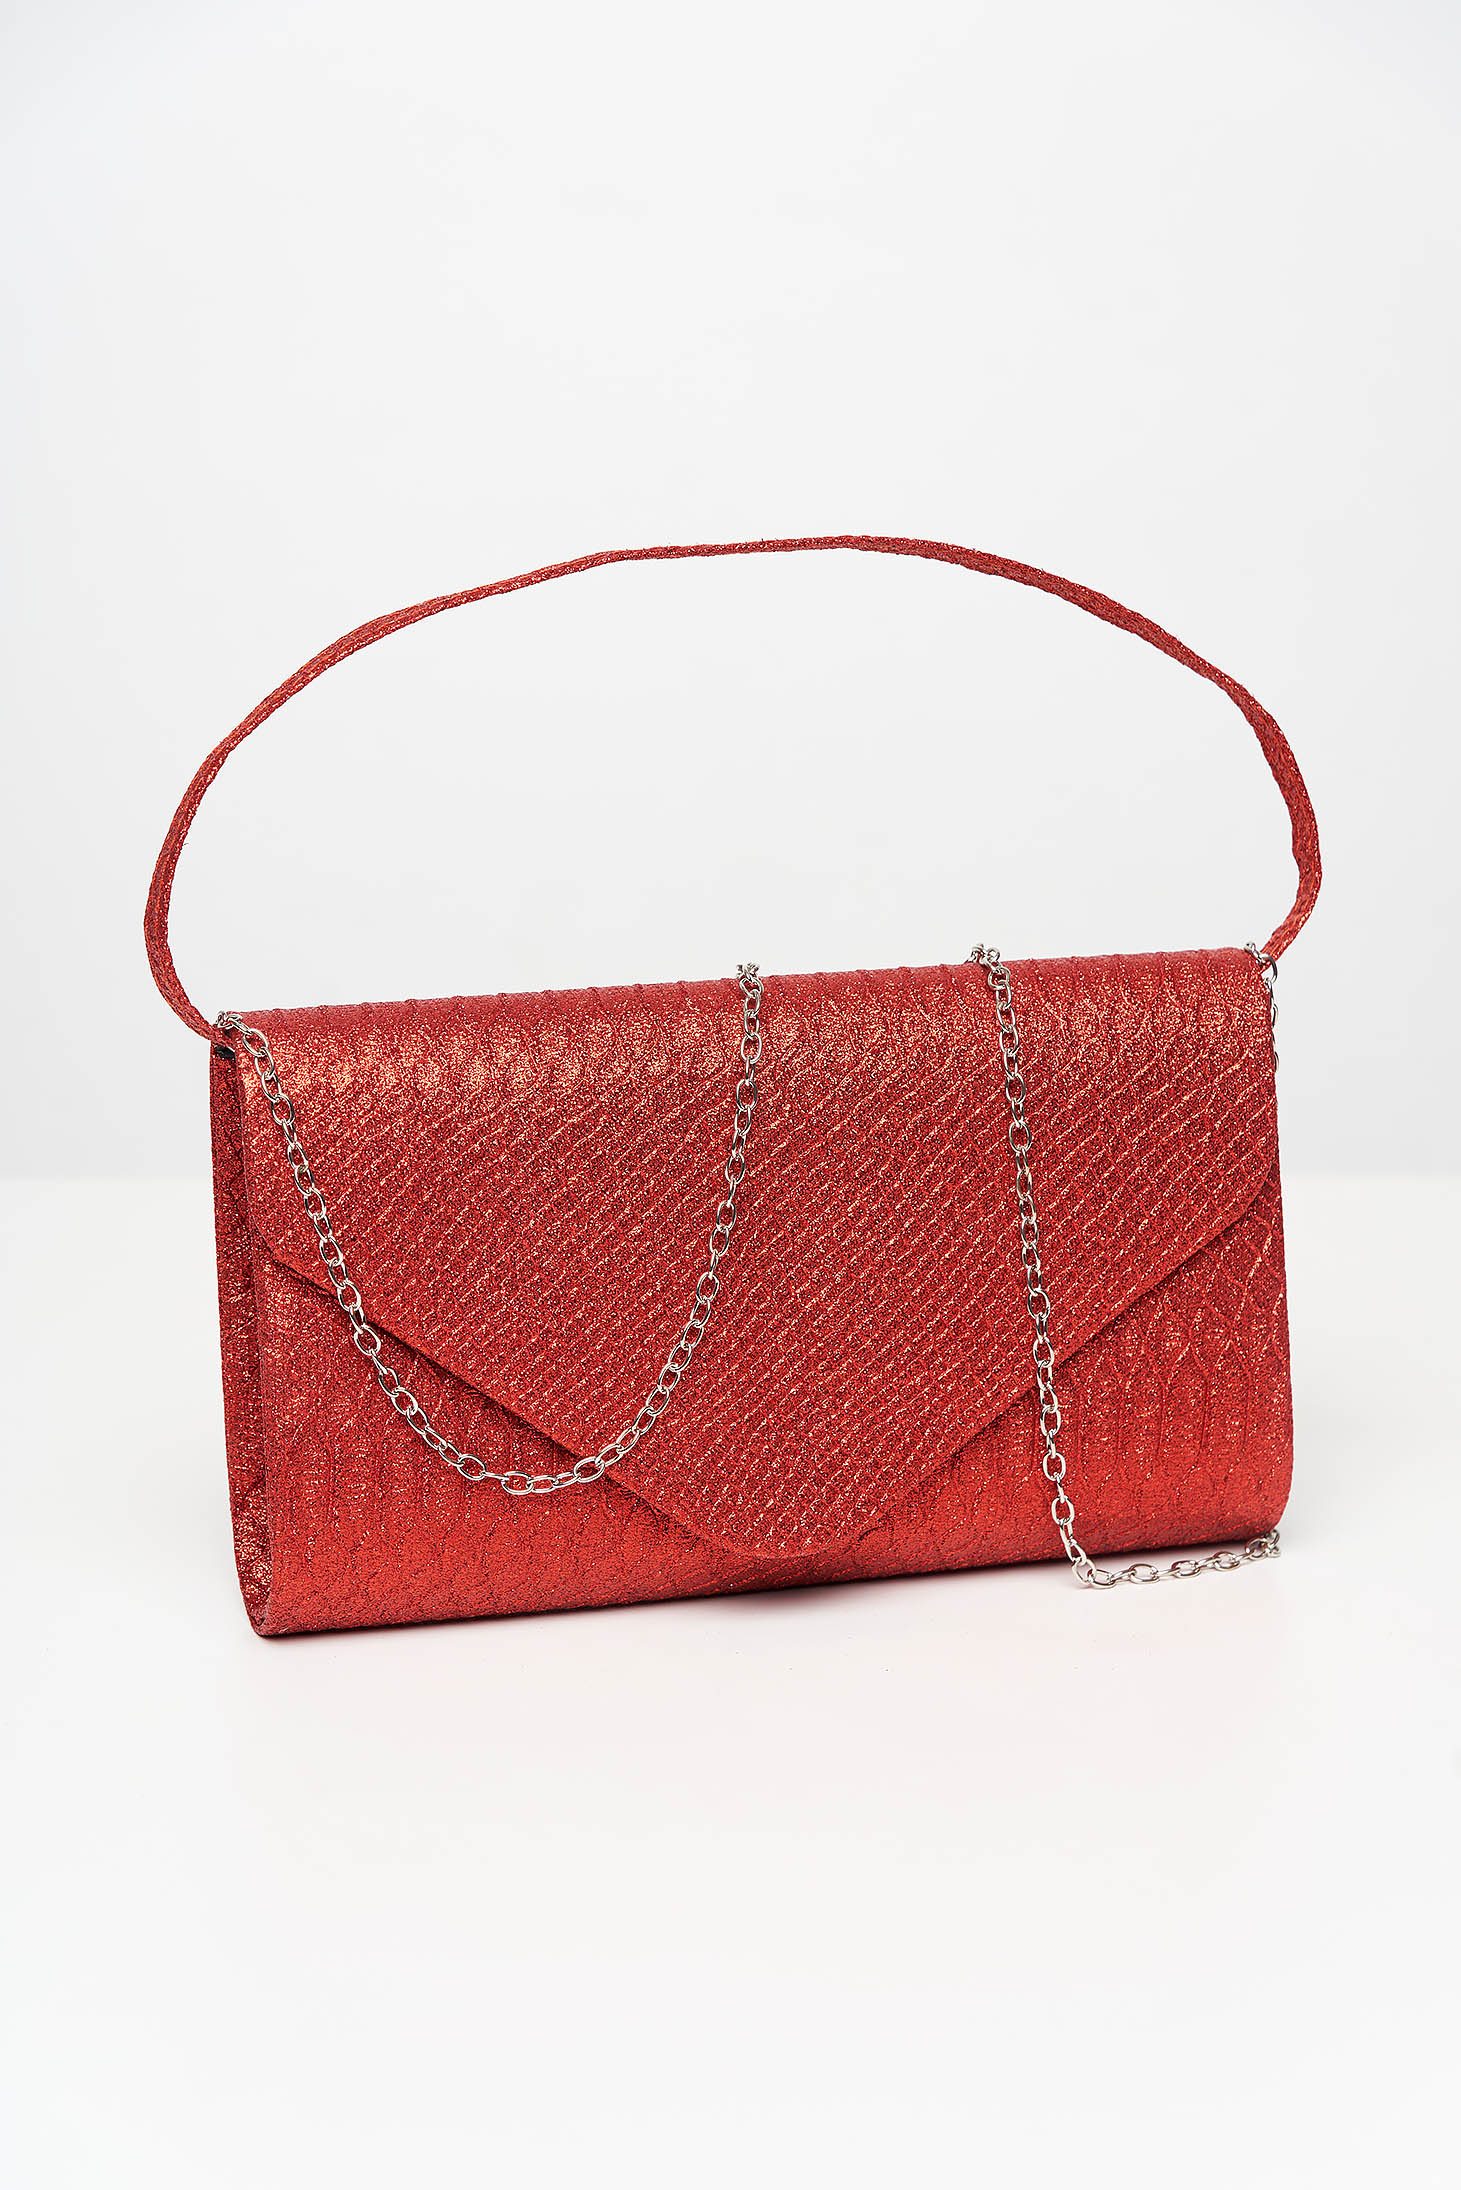 Red bag occasional clutch with glitter details accessorized with chain detachable chain